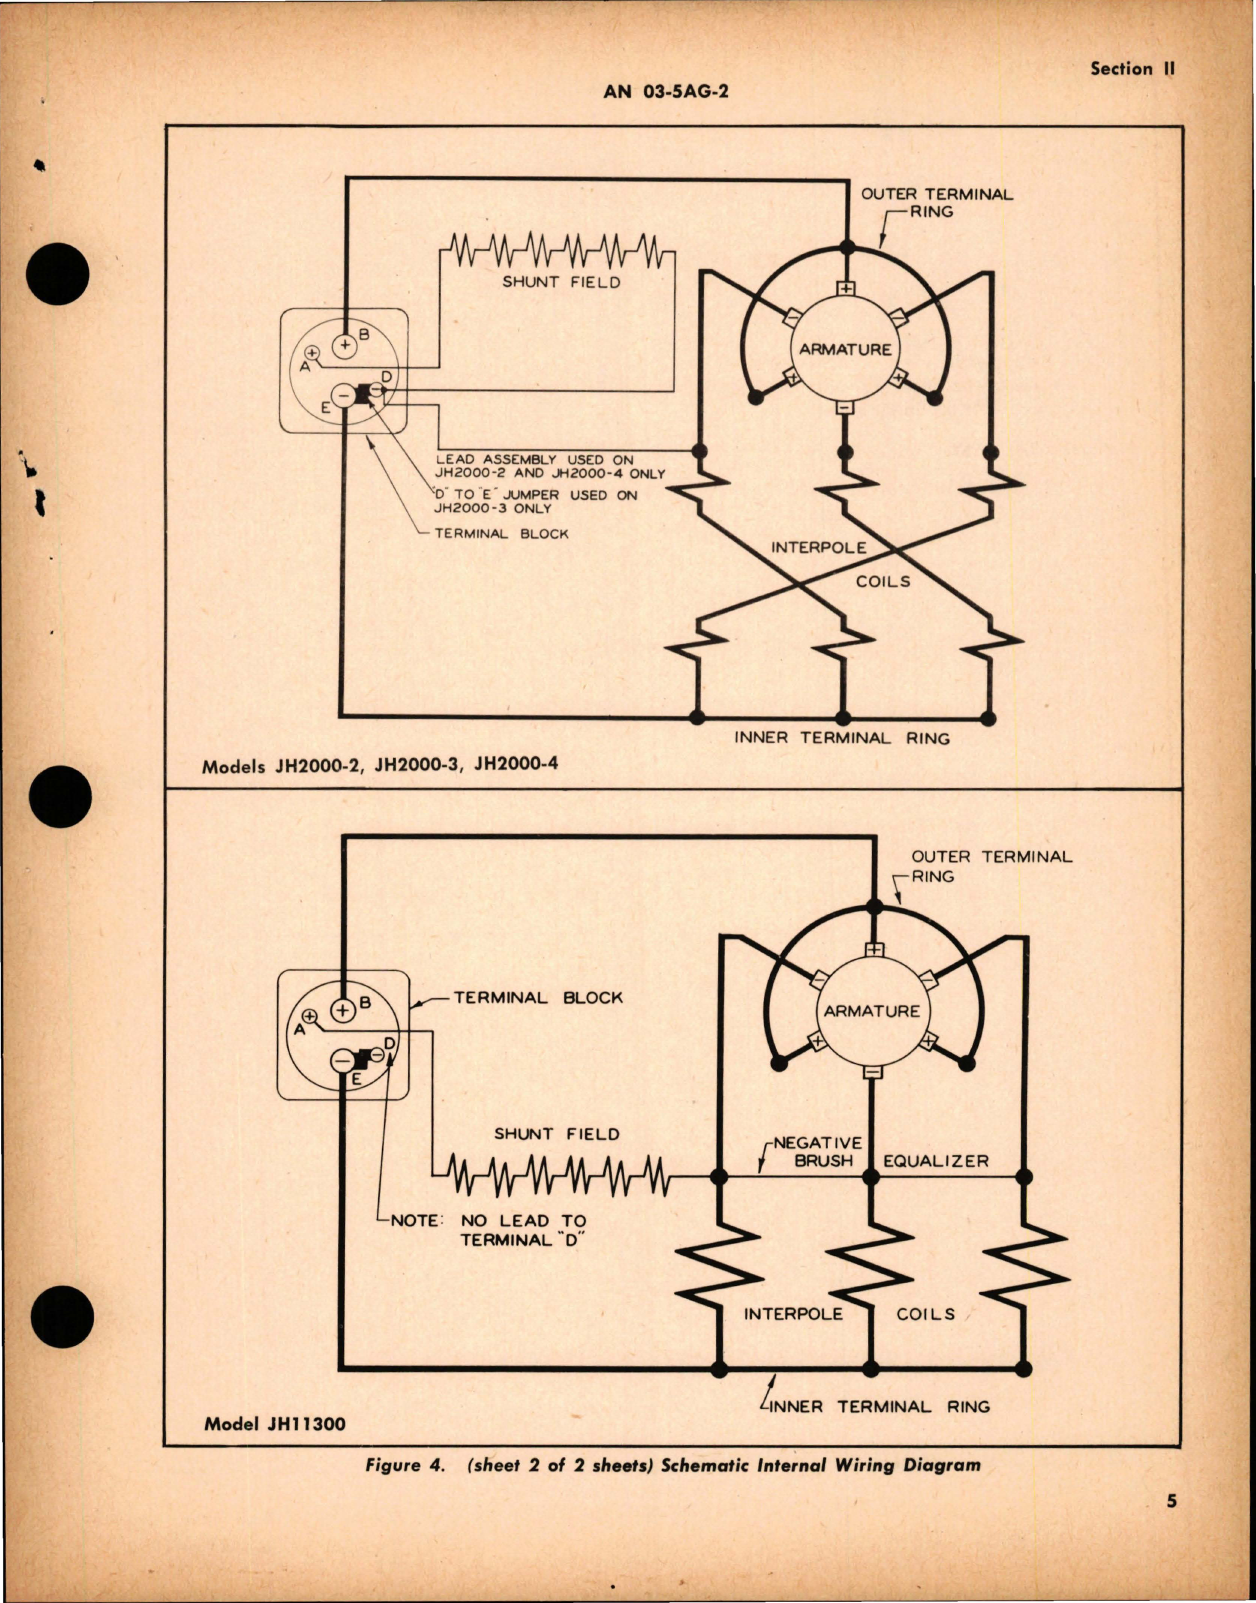 Sample page 9 from AirCorps Library document: Operation, Service and Overhaul Instructions with Parts Catalog for Generators - Types R-1 and R-2